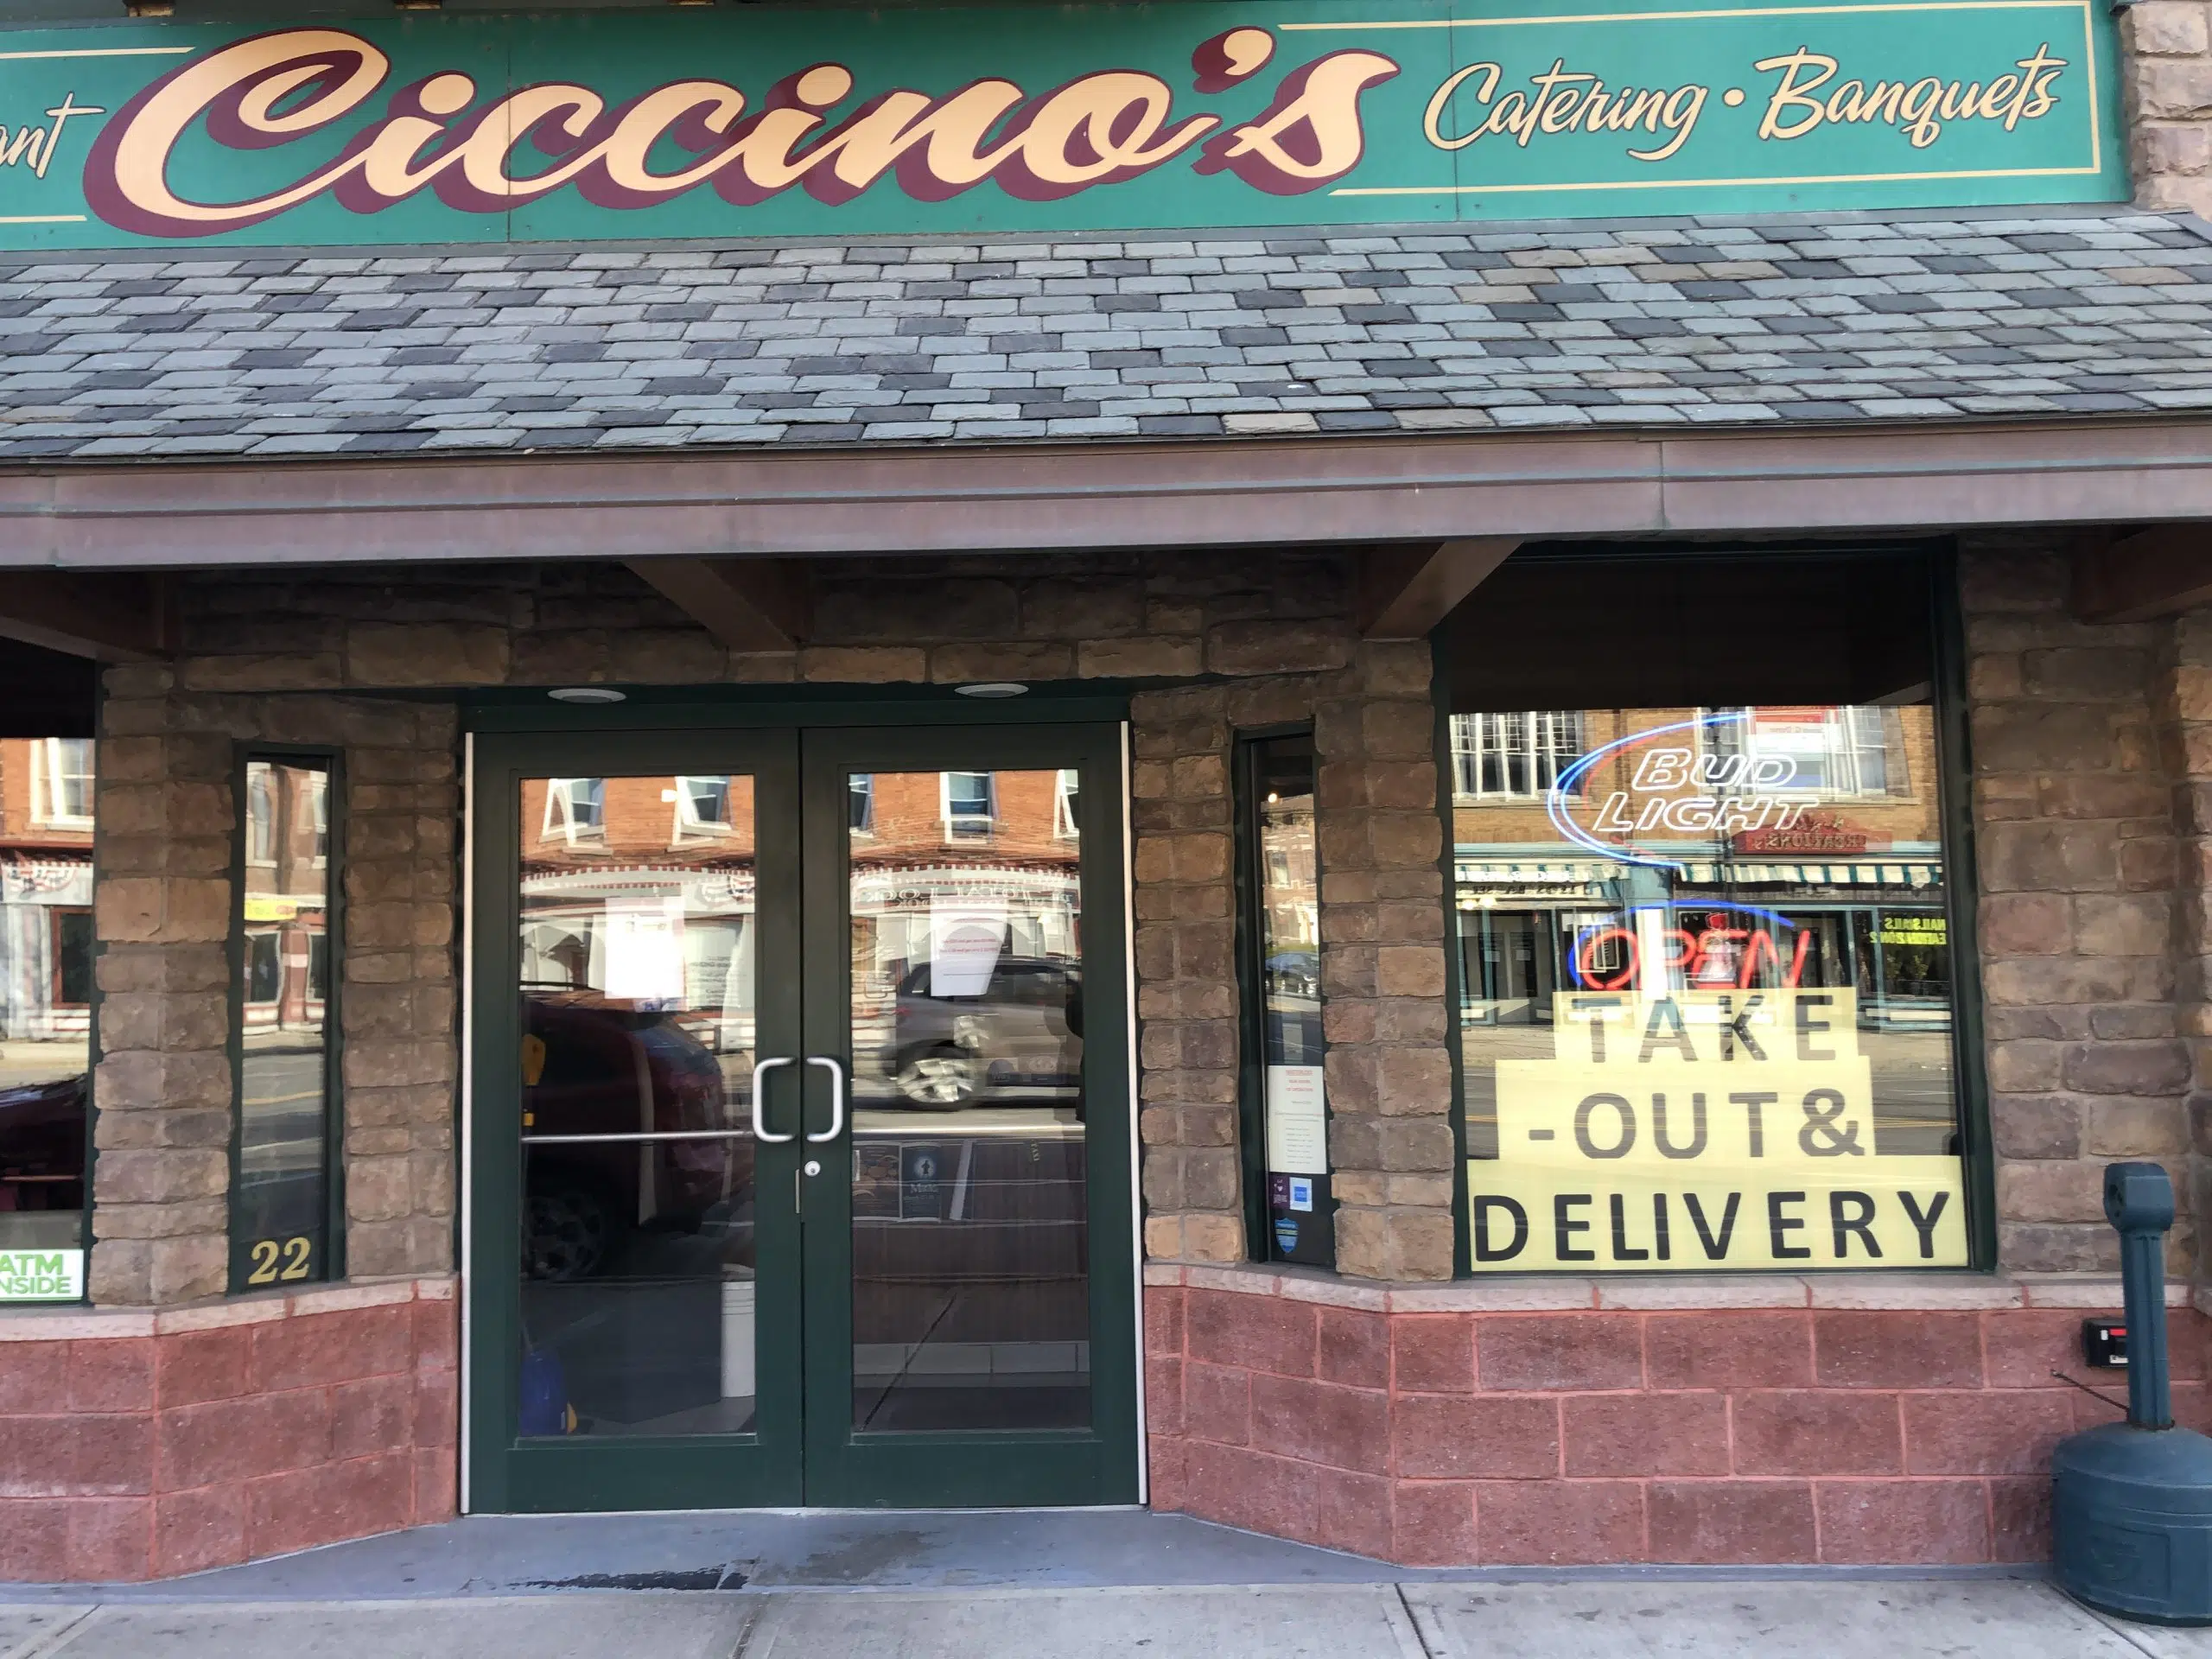 Two Popular Waterloo Restaurants Open for Take-Out | Finger Lakes Daily